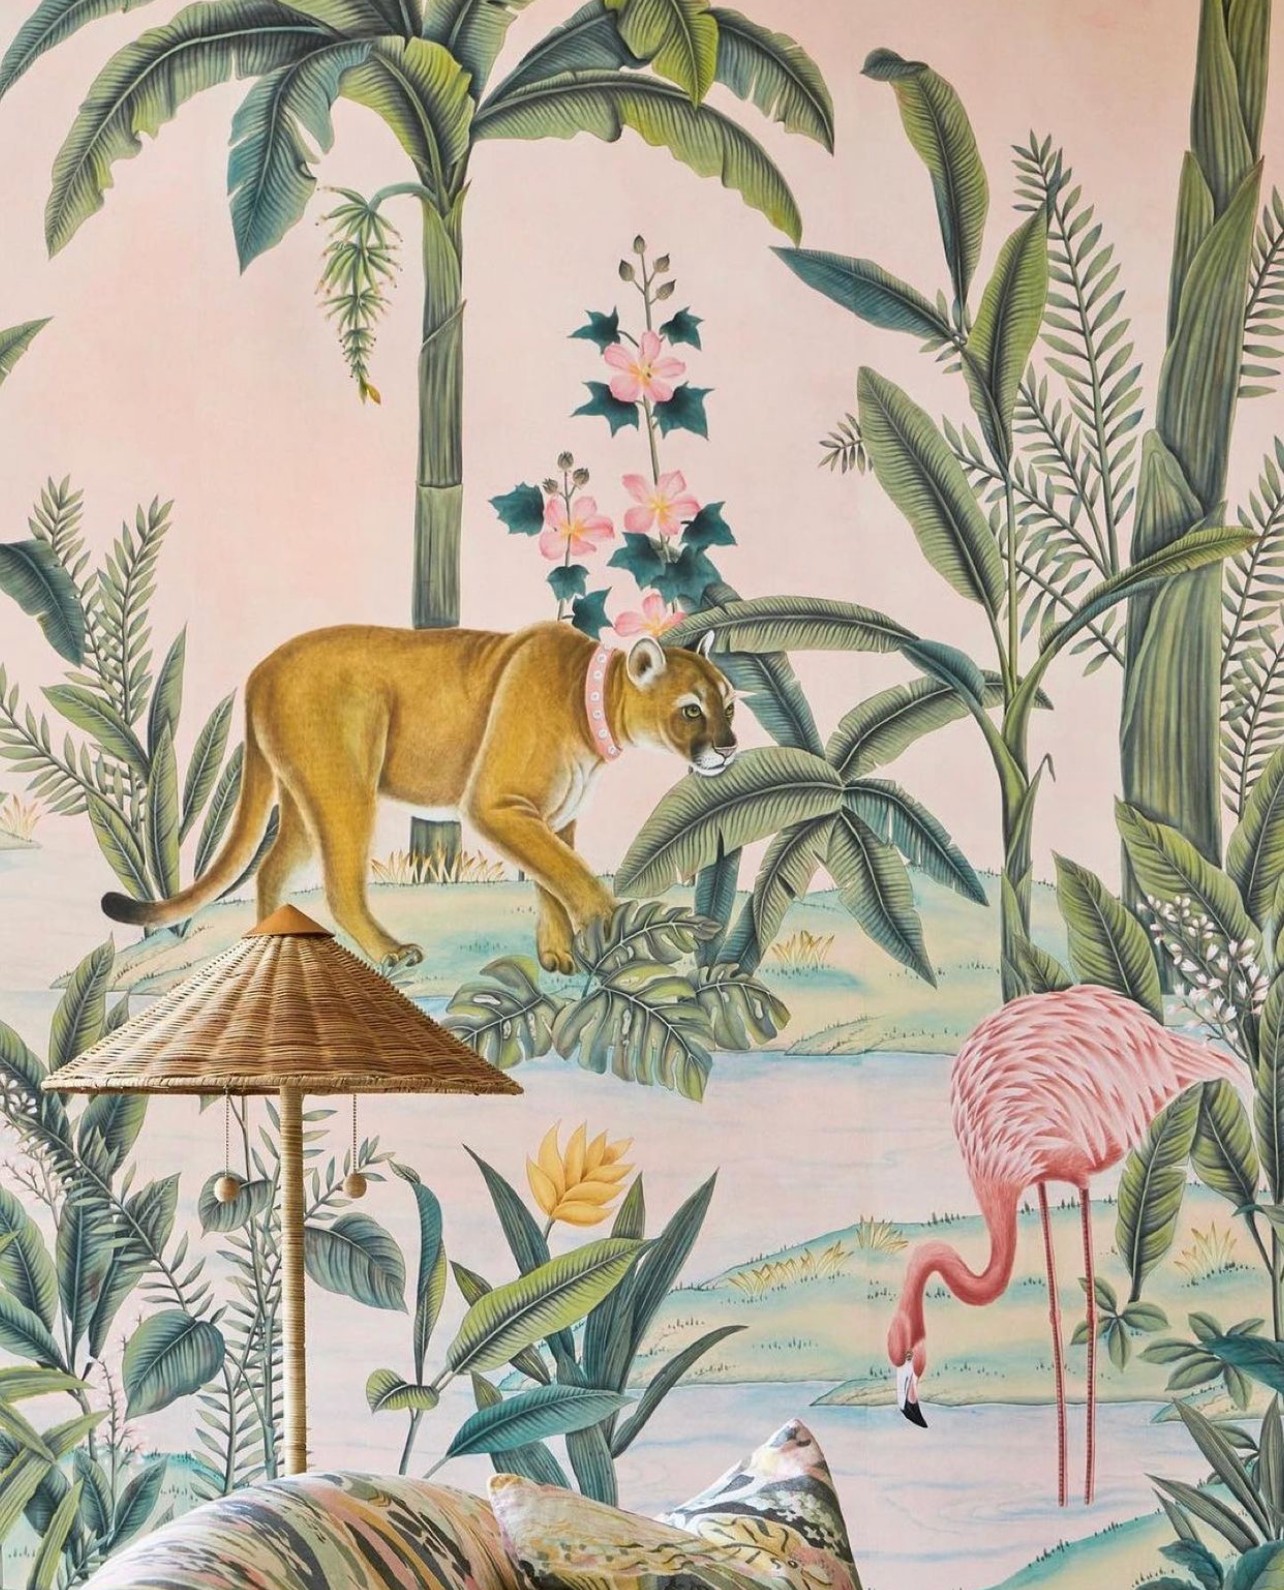 In Design | Decor Inspiration: de Gournay at the Colony Hotel, Palm Beach